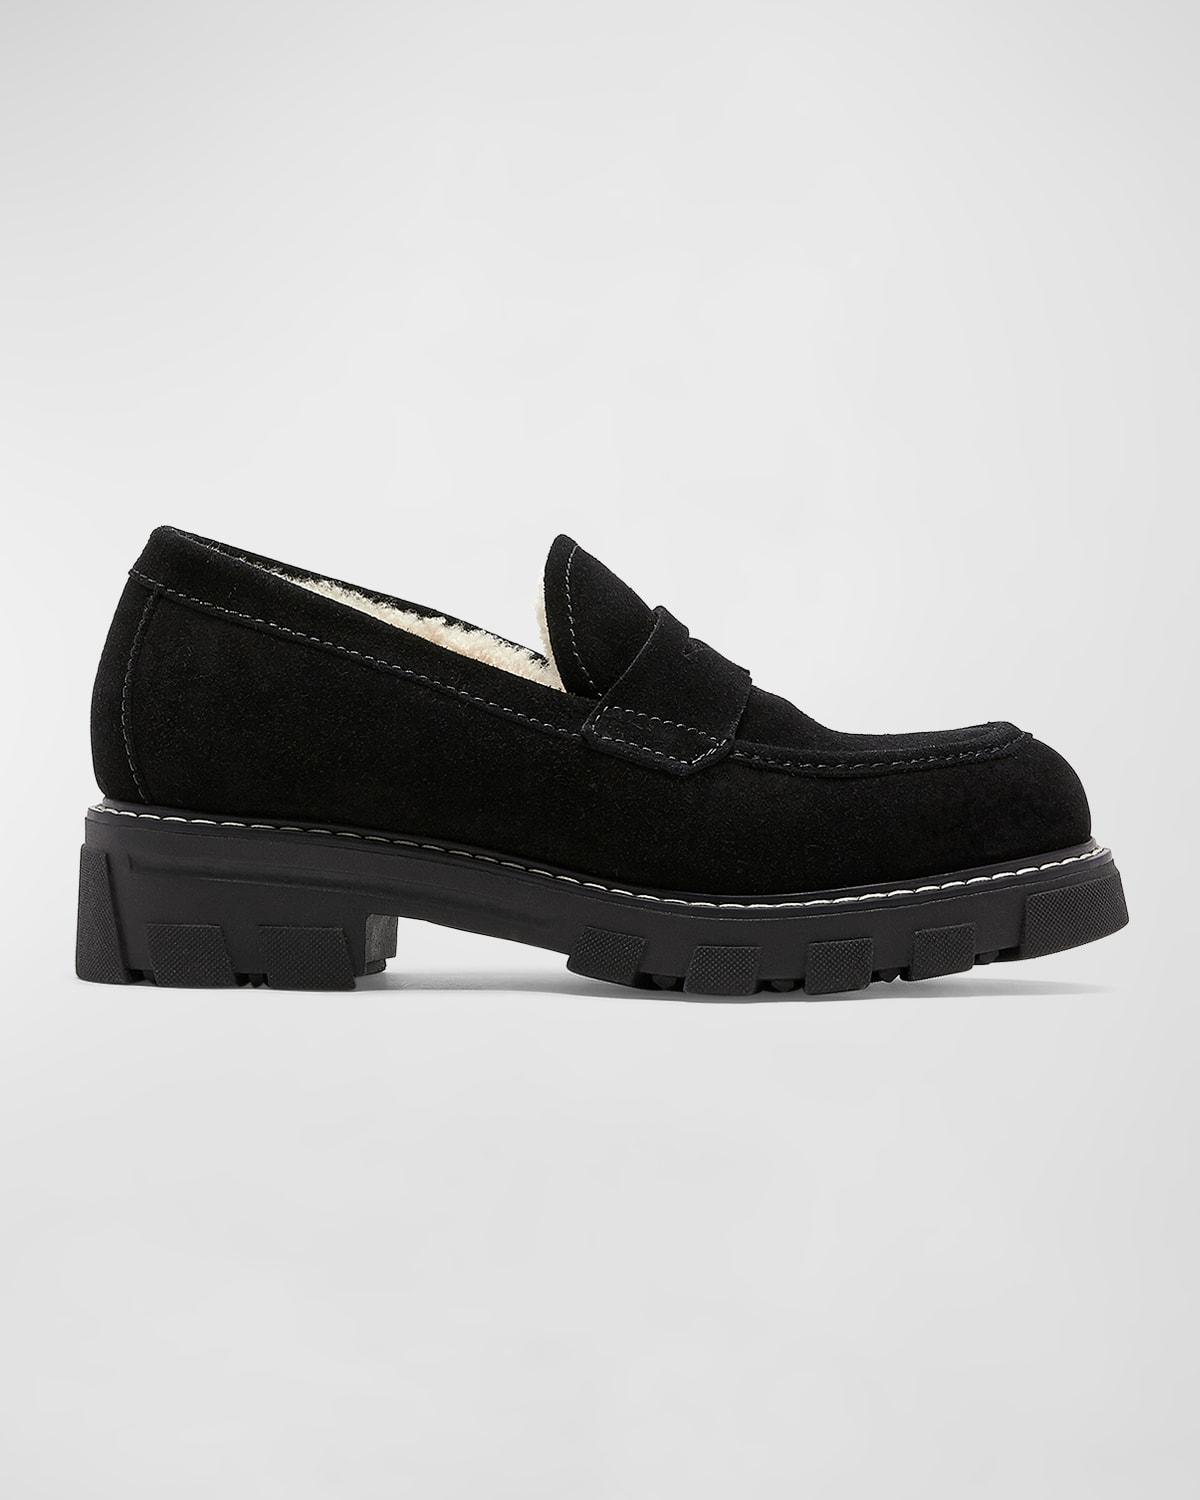 La Canadienne Darcy Suede Shearling-lined Penny Loafers in Black | Lyst